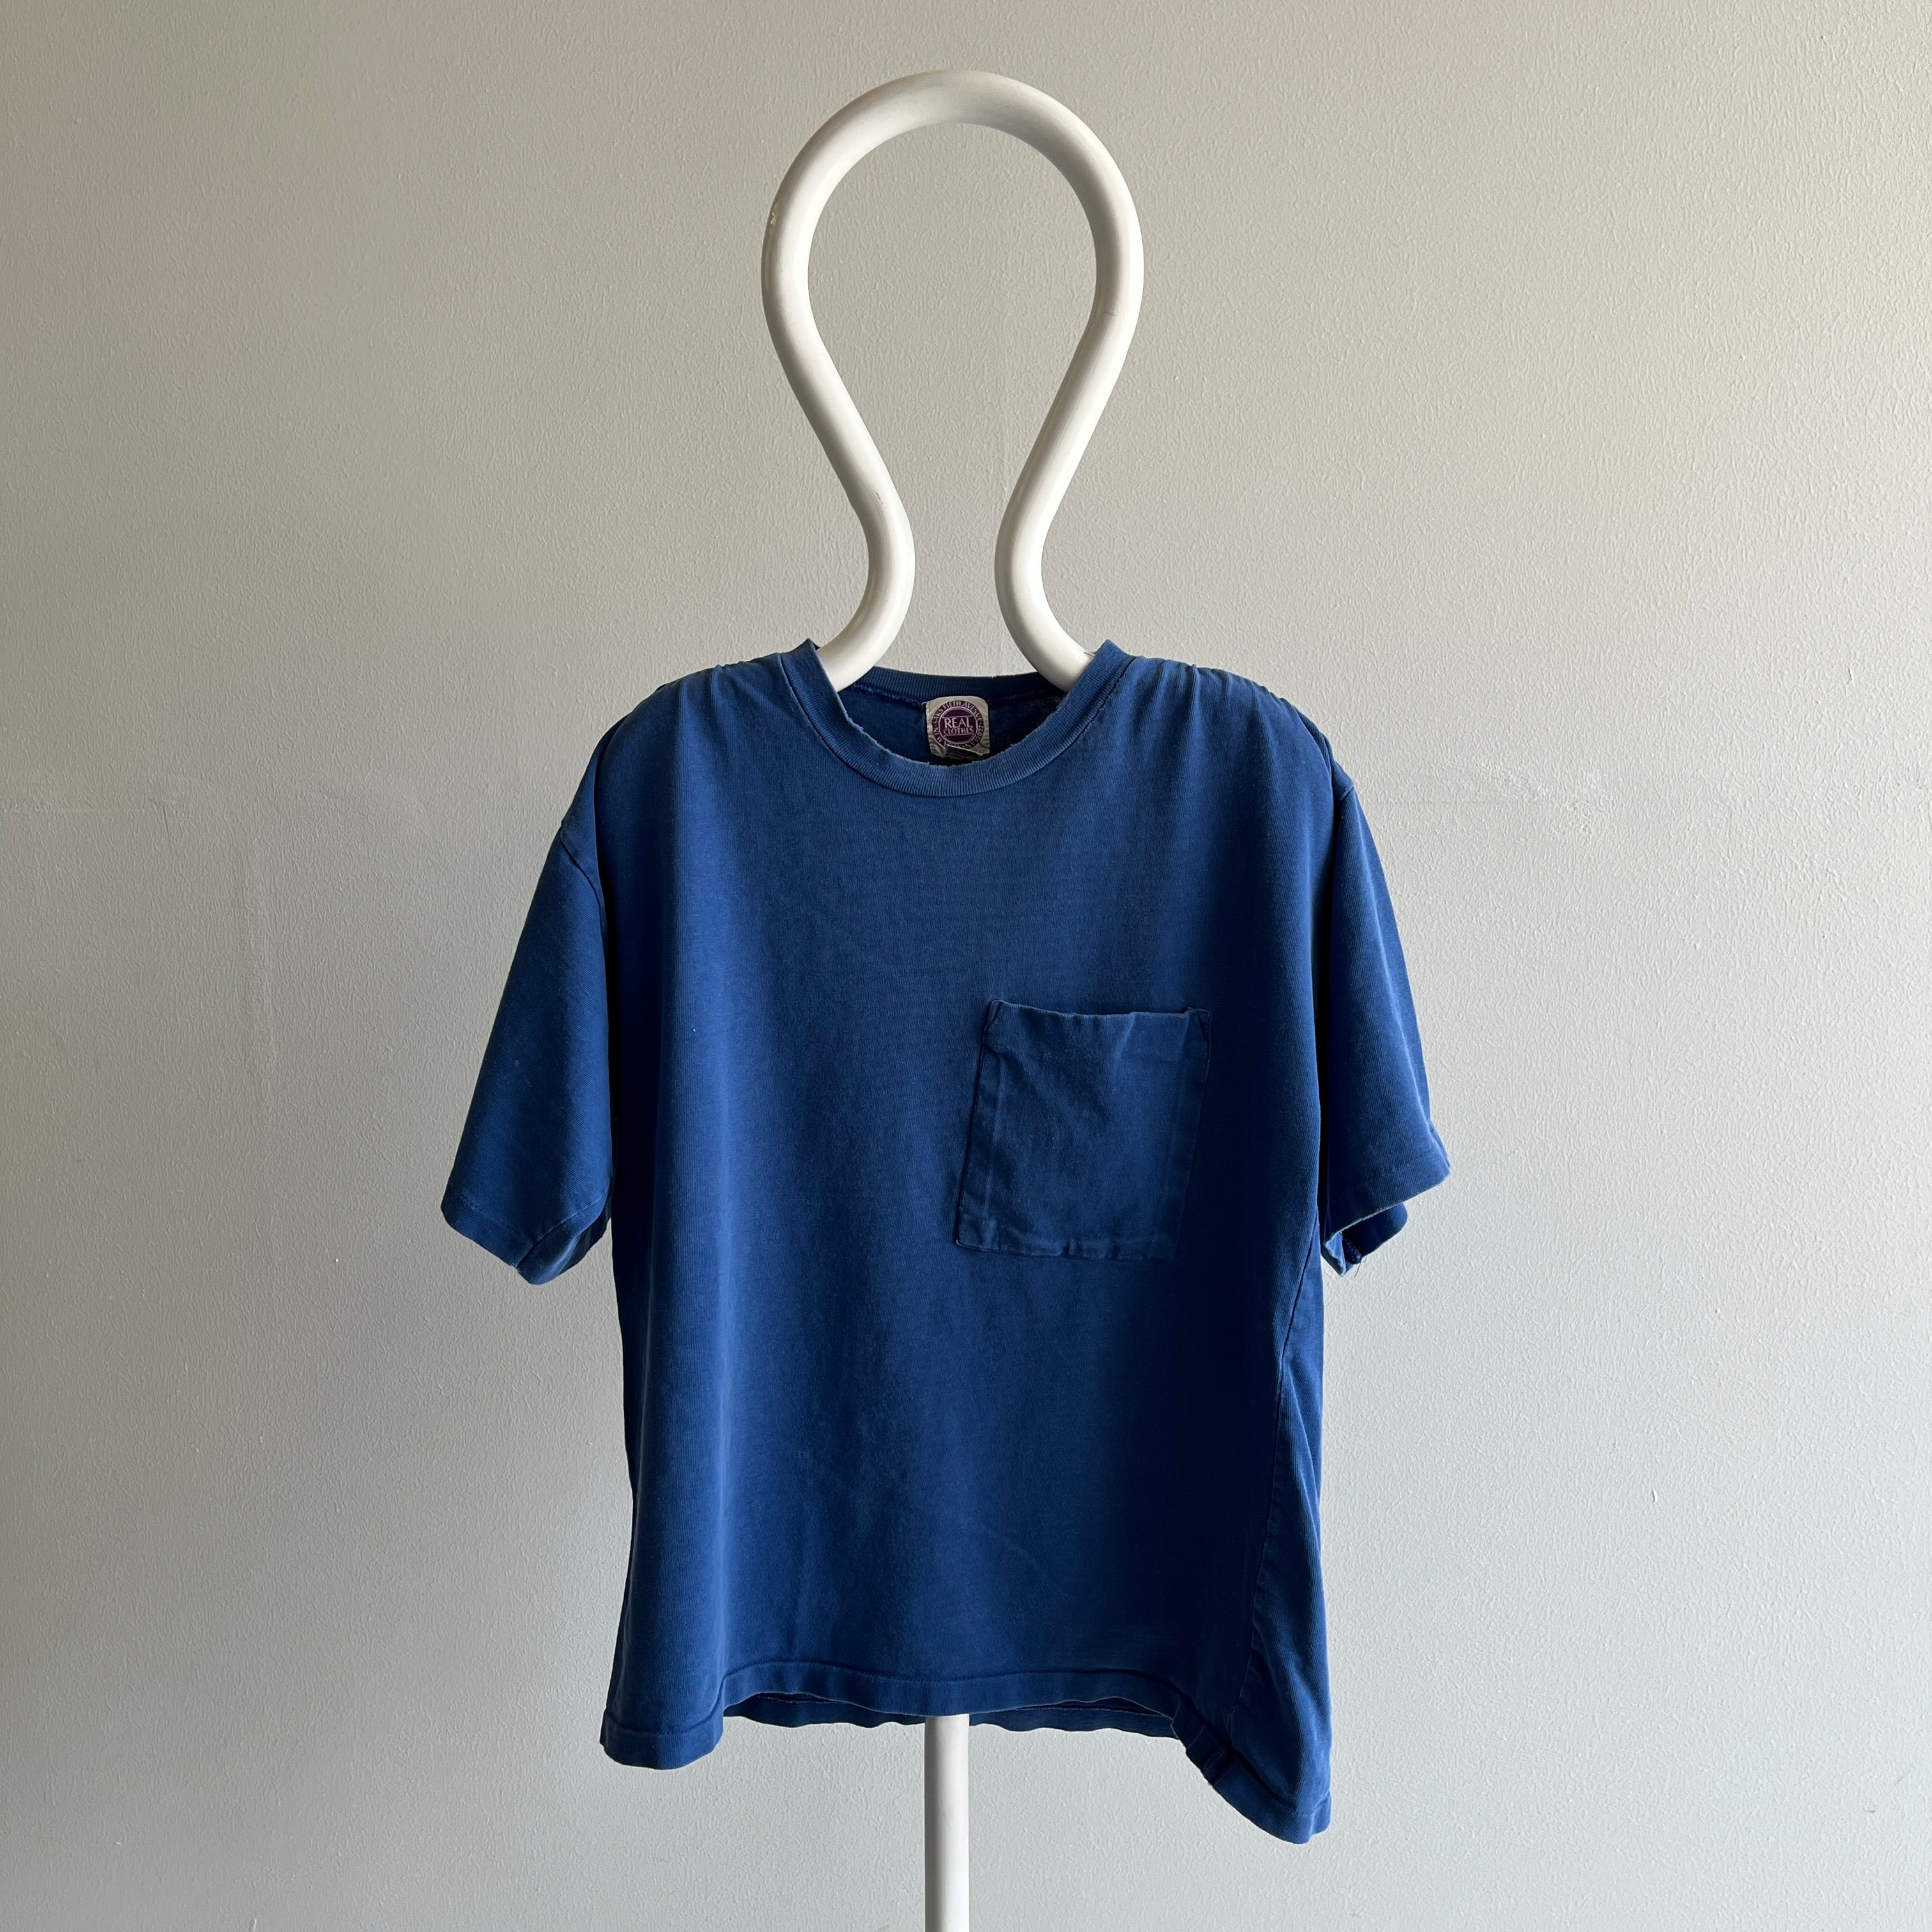 1980s Cotton Oversized (REALLY AWESOME) Heavyweight Blank Blue Pocket T-Shirt - Not. Your. Average.